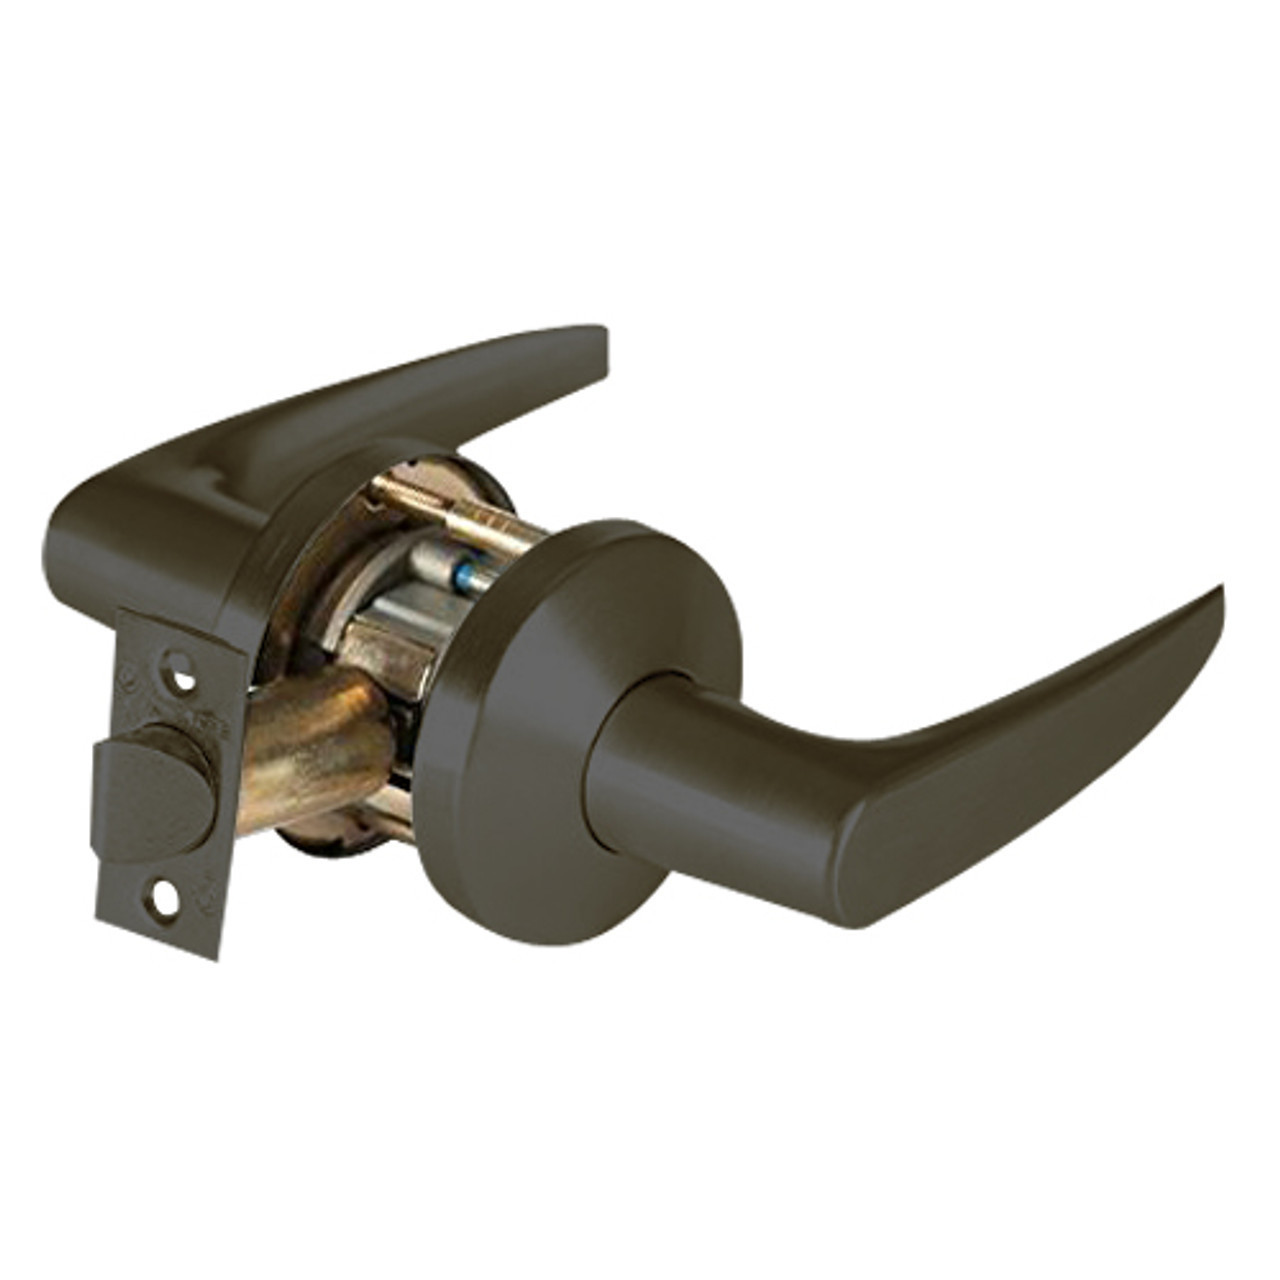 9K50N16KSTK613LM Best 9K Series Passage Heavy Duty Cylindrical Lever Locks with Curved Without Return Lever Design in Oil Rubbed Bronze